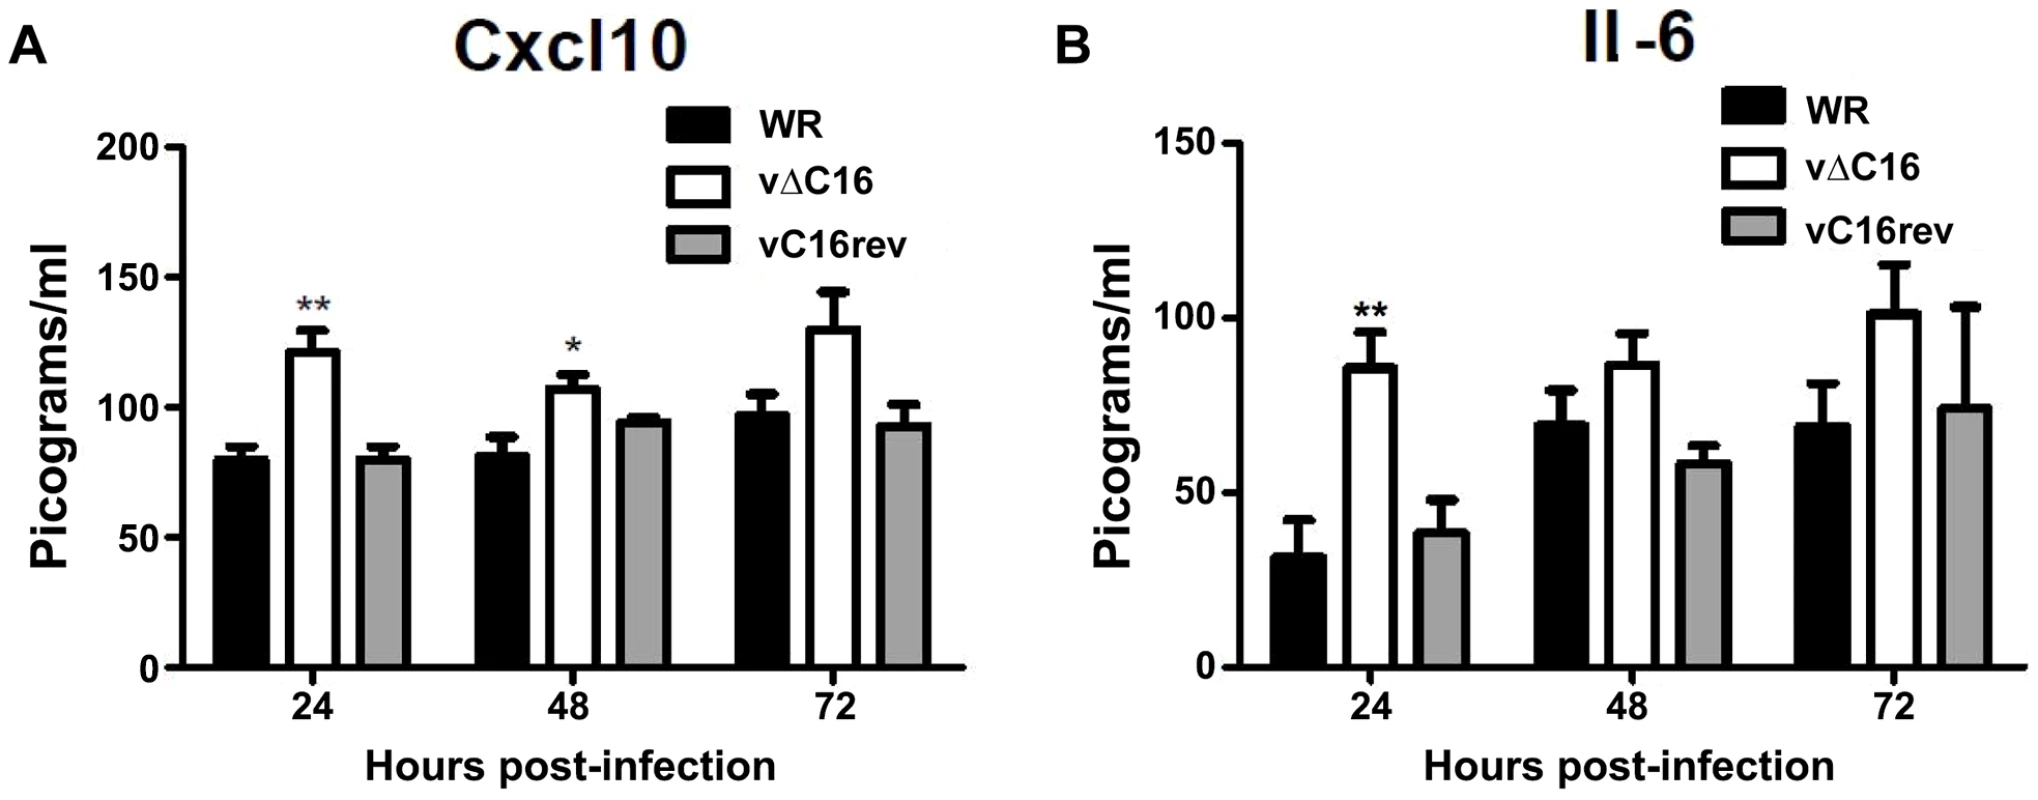 C16 affects Cxcl10 and Il-6 production in vivo.